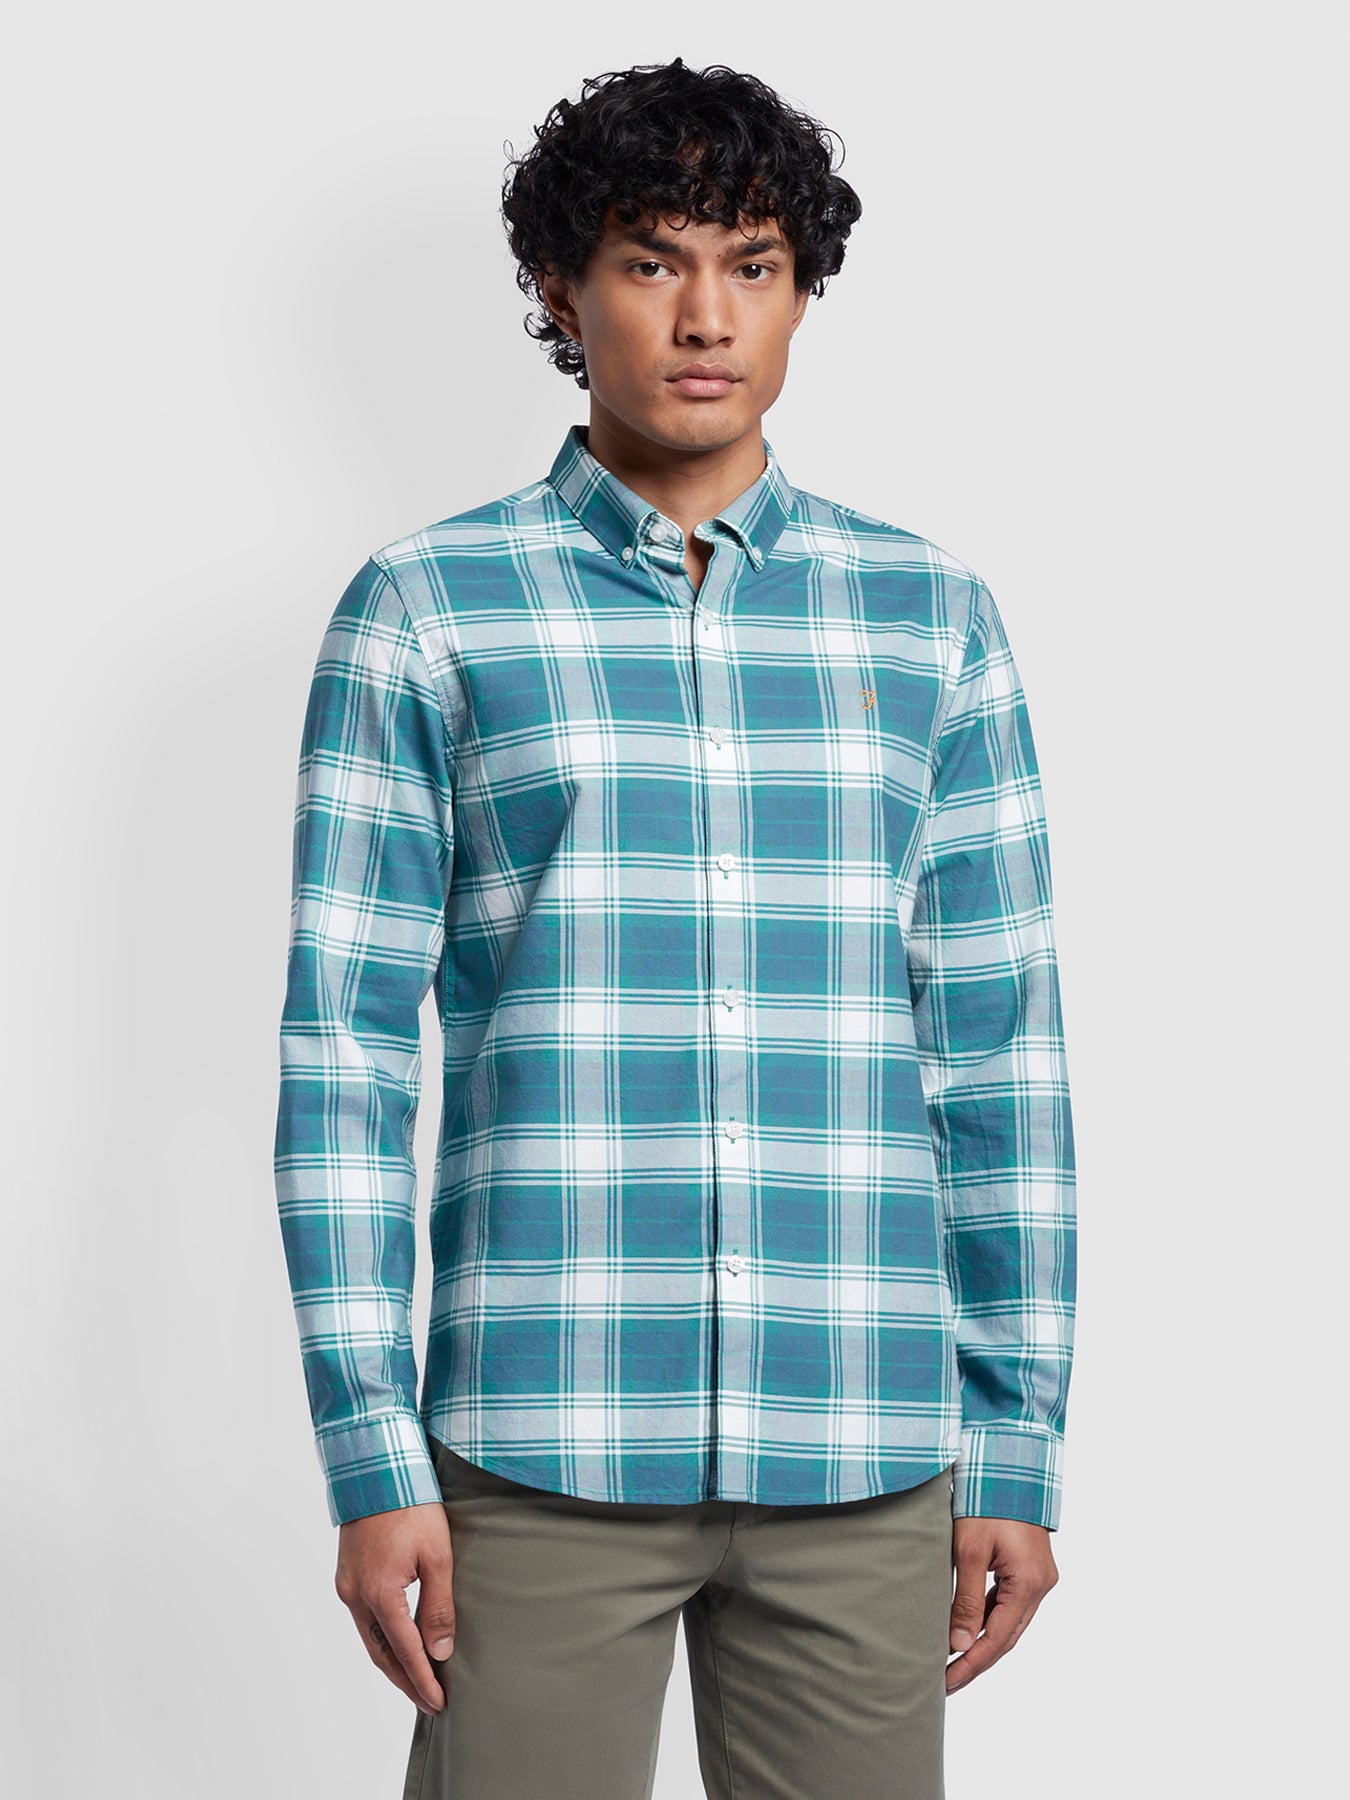 View Brewer Slim Fit Organic Cotton Oxford Sleeve Check Shirt In Ocean information